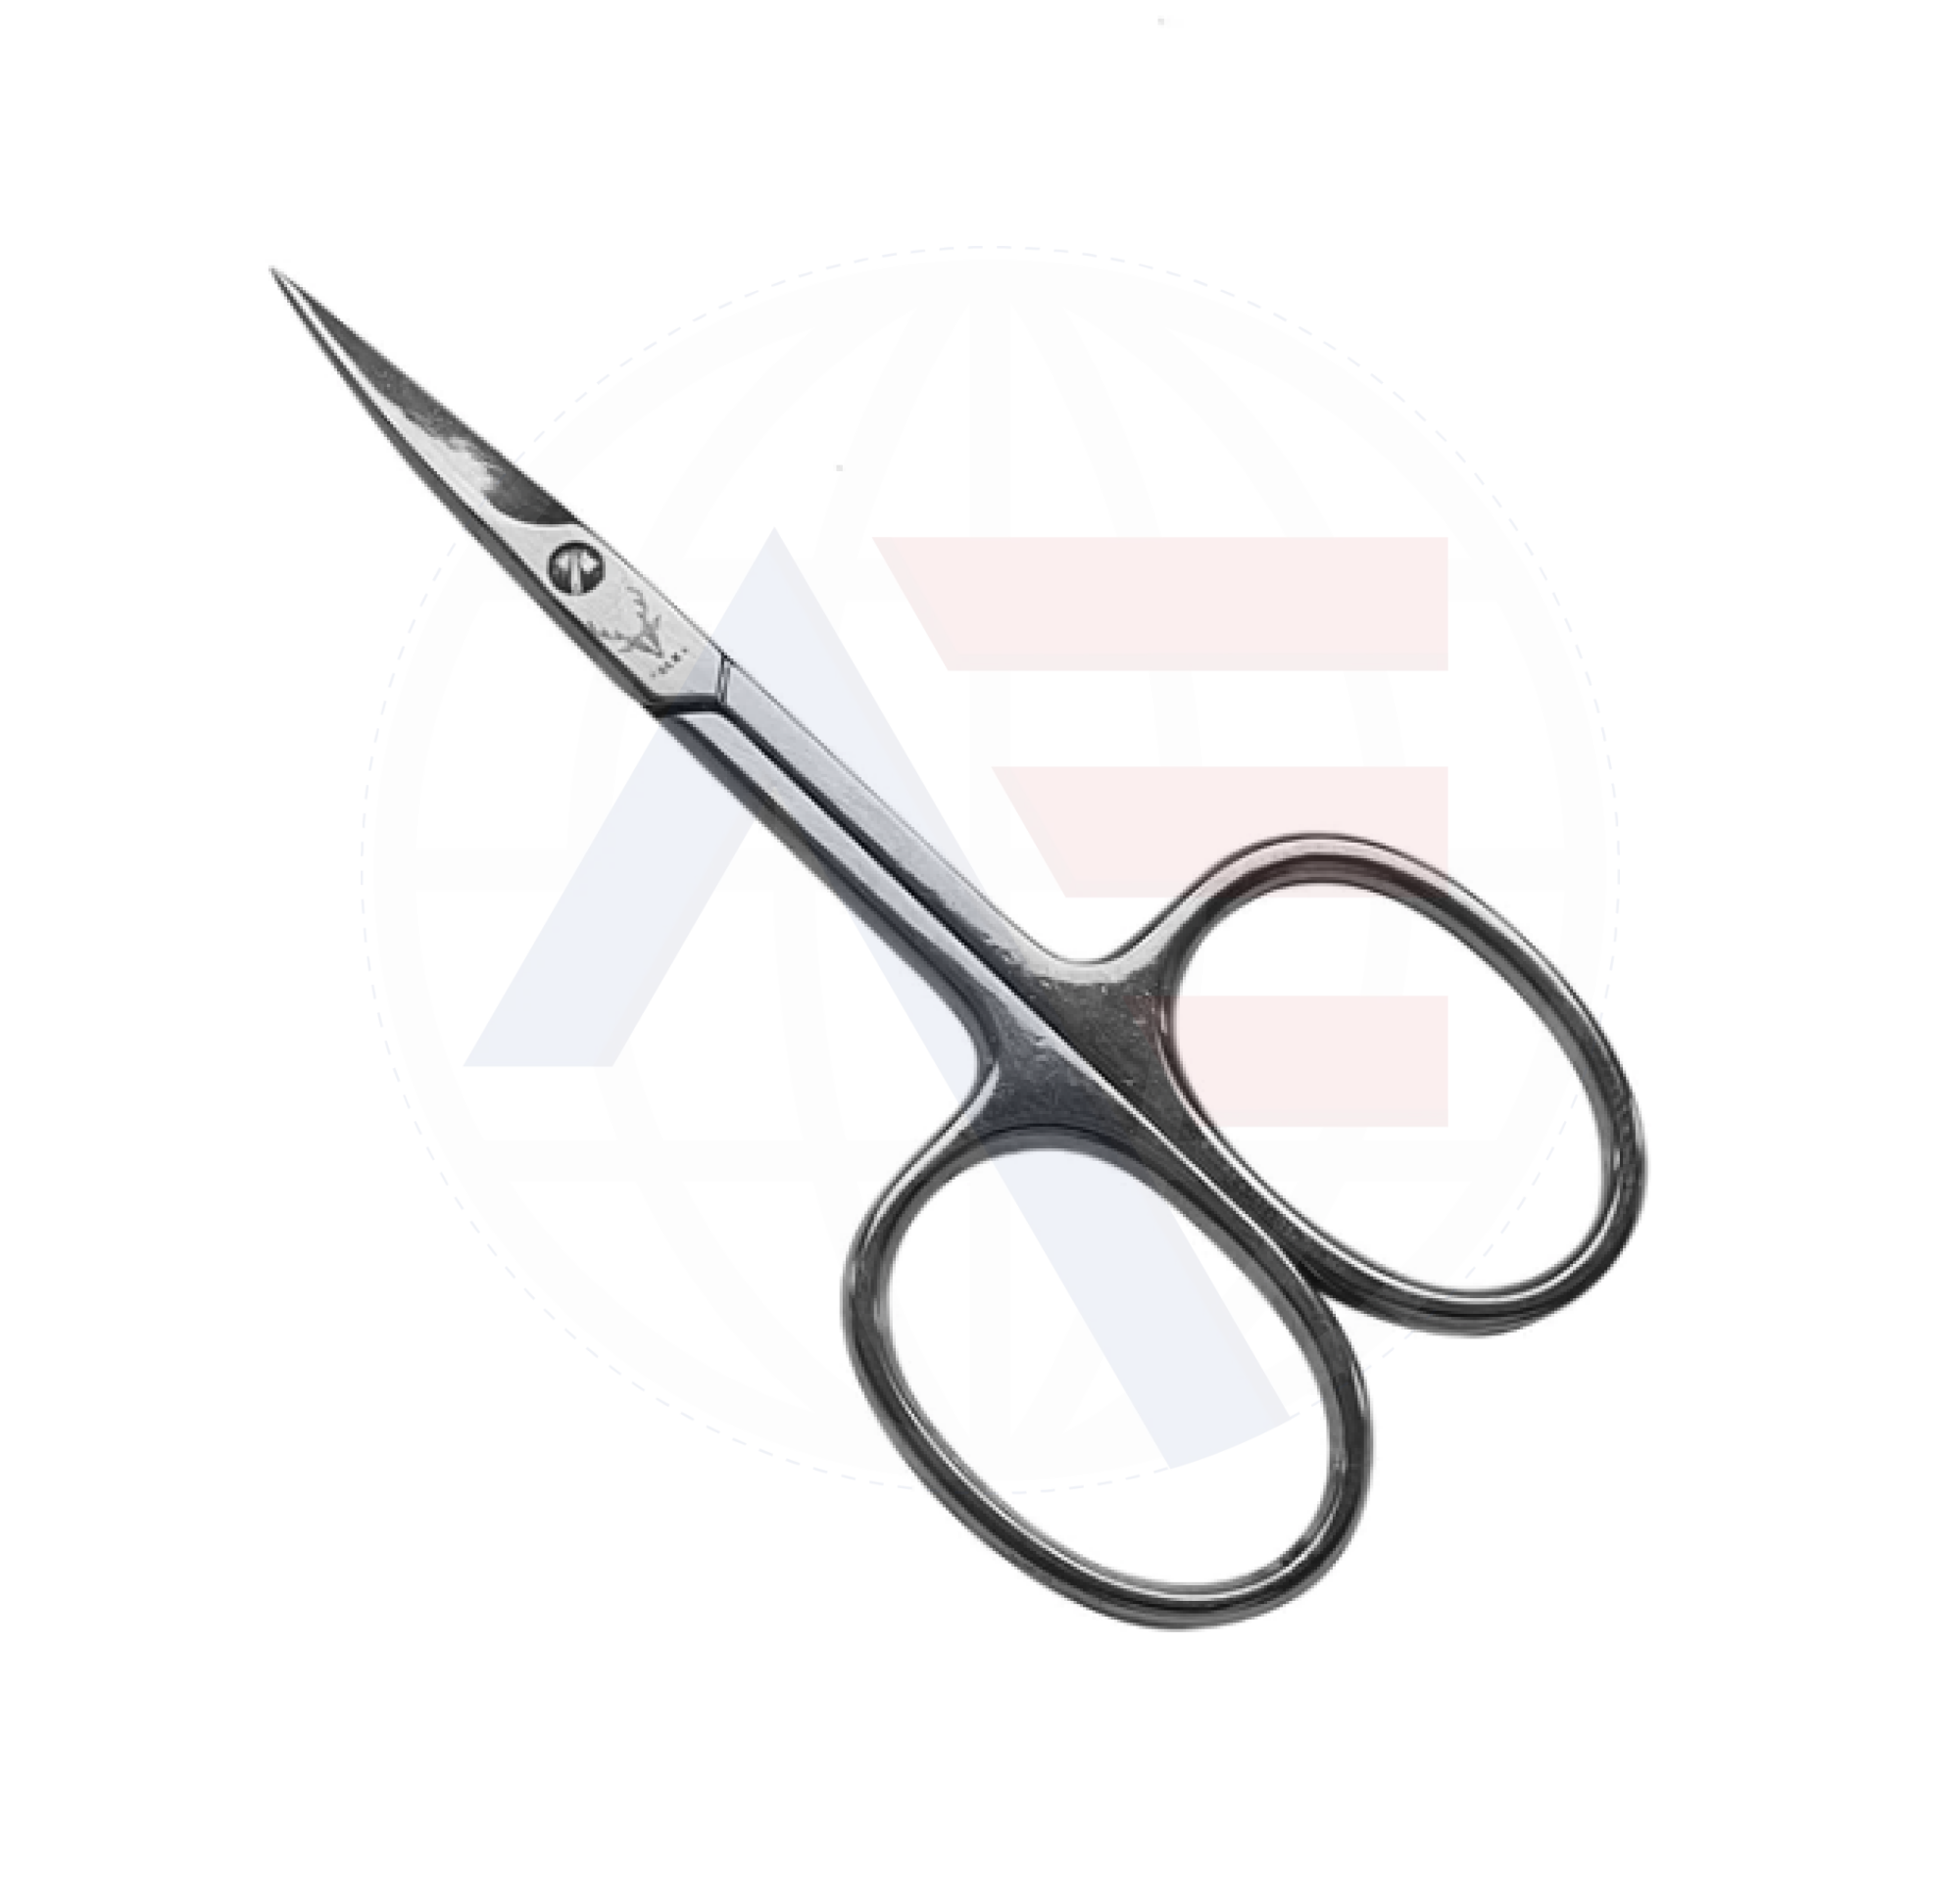 Elk 3.5/9Cm Scissors With Double Pointed Curved Blades